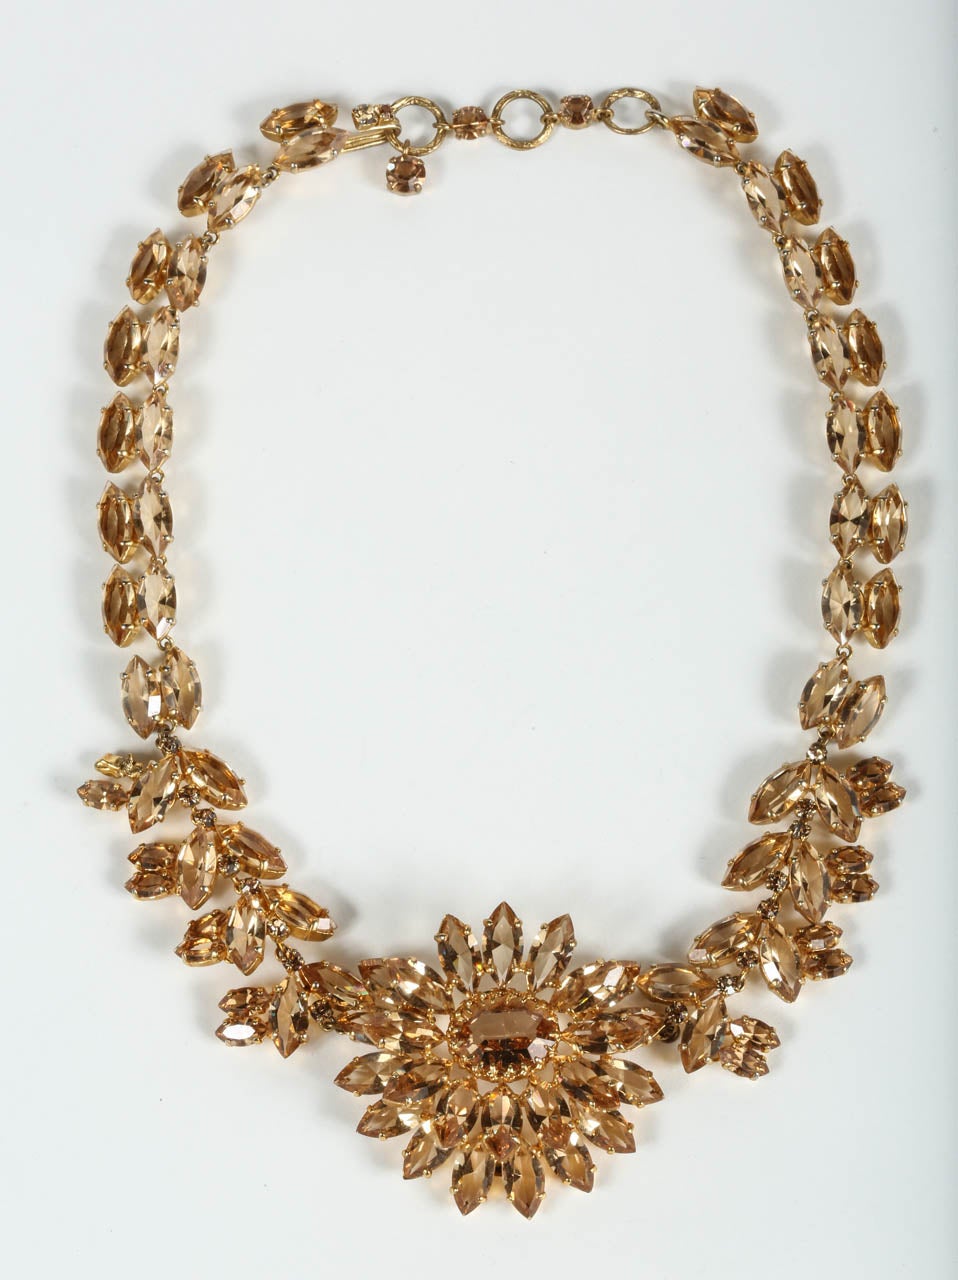 Christian Dior 1961 Stunning Amber Crystal Necklace at 1stdibs